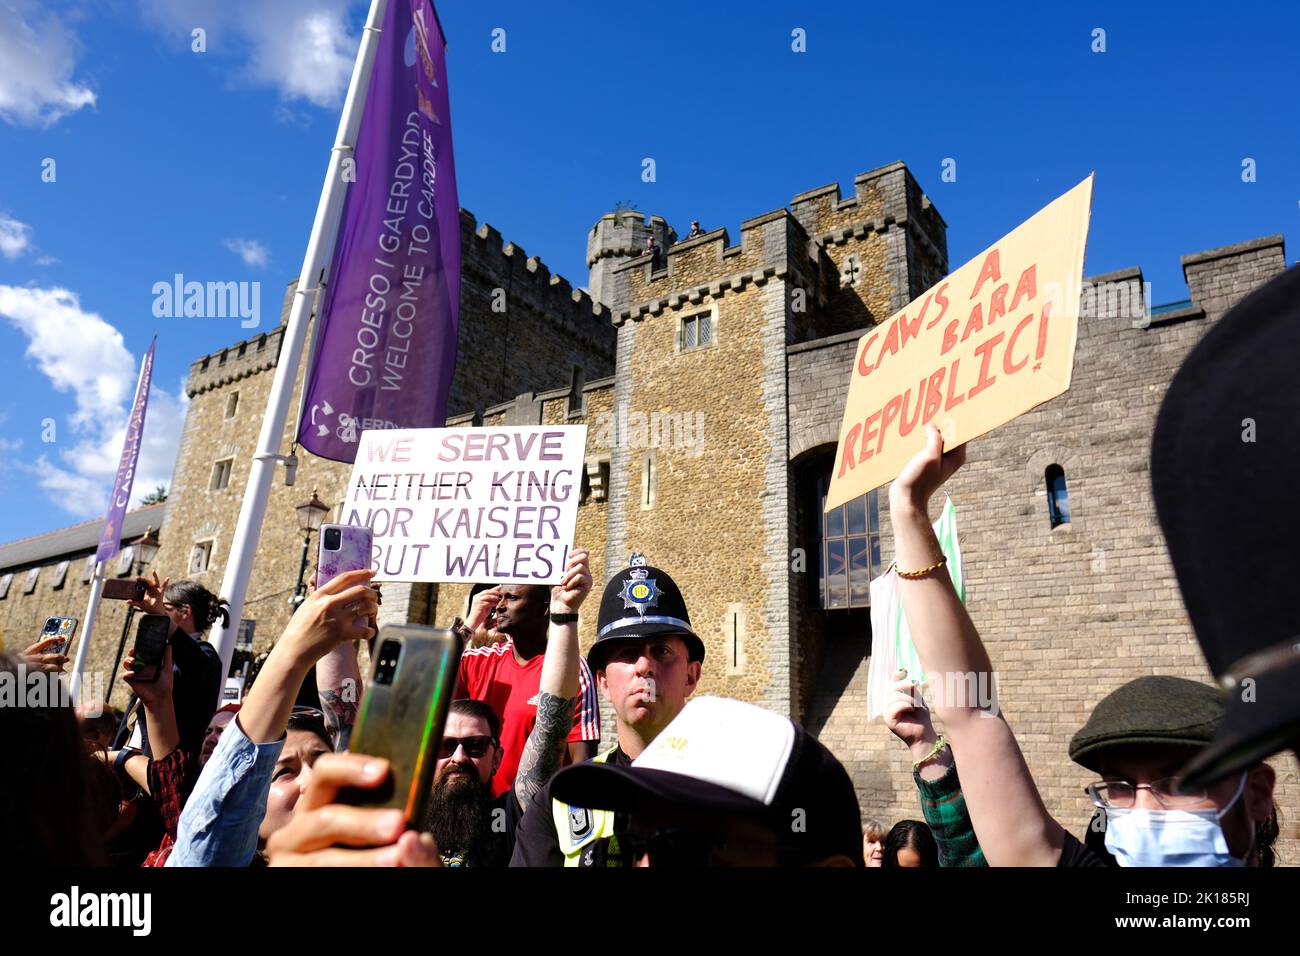 Cardiff Castle, Cardiff, Wales, UK – Friday 16th September 2022 – Protesters hold anti royalist placards outside Cardiff Castle as King Charles III makes his first visit to Wales as the new Monarch. Photo Steven May / Alamy Live News Stock Photo